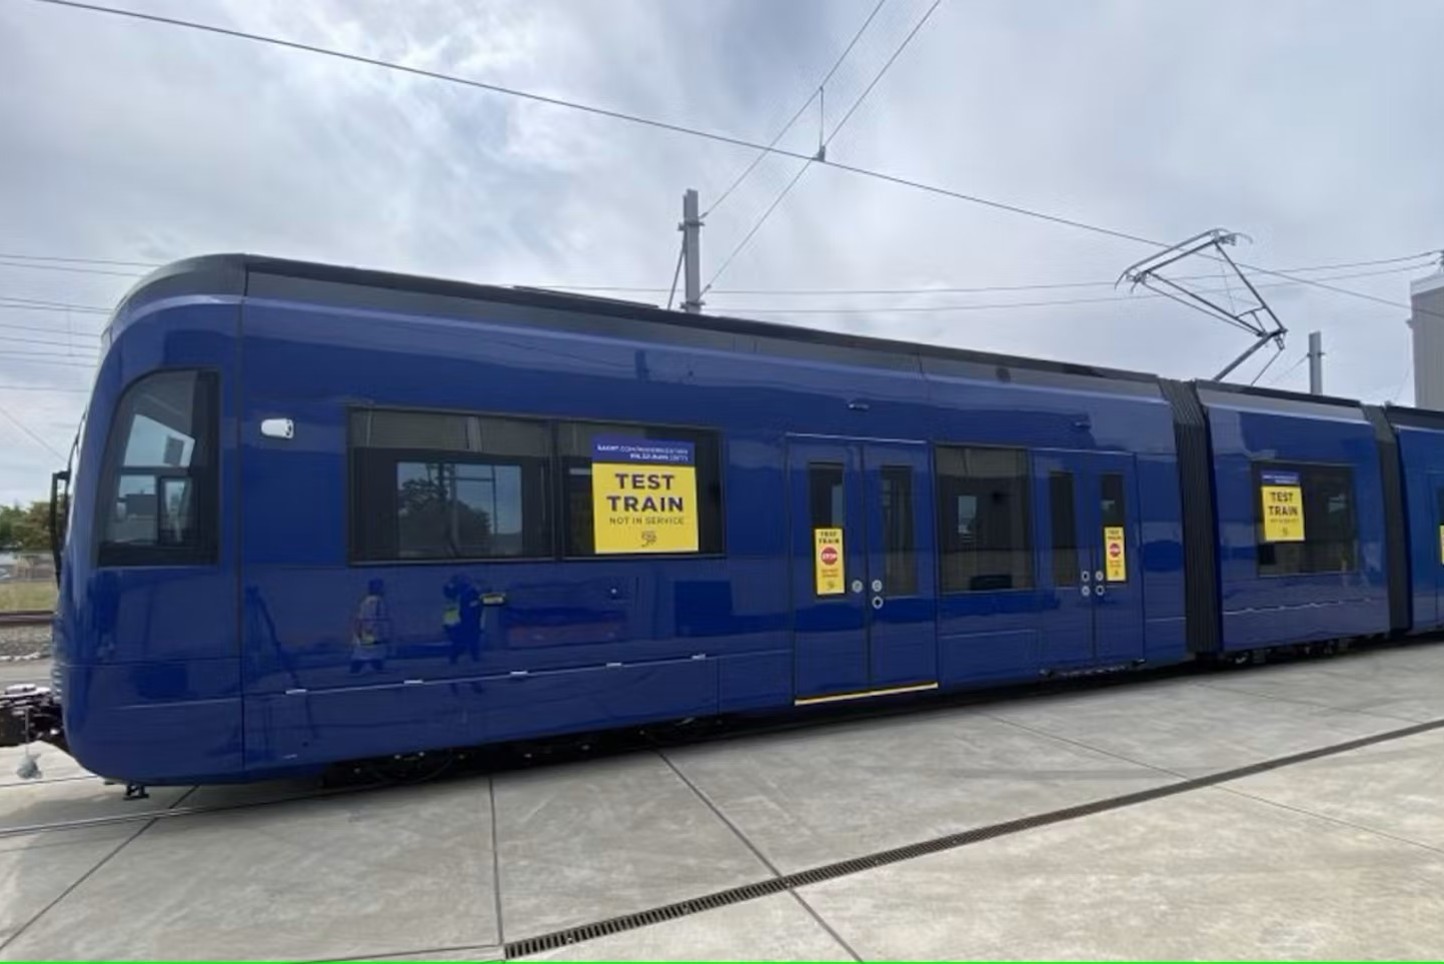 SacRT's new low-floor trams from Siemens mobility